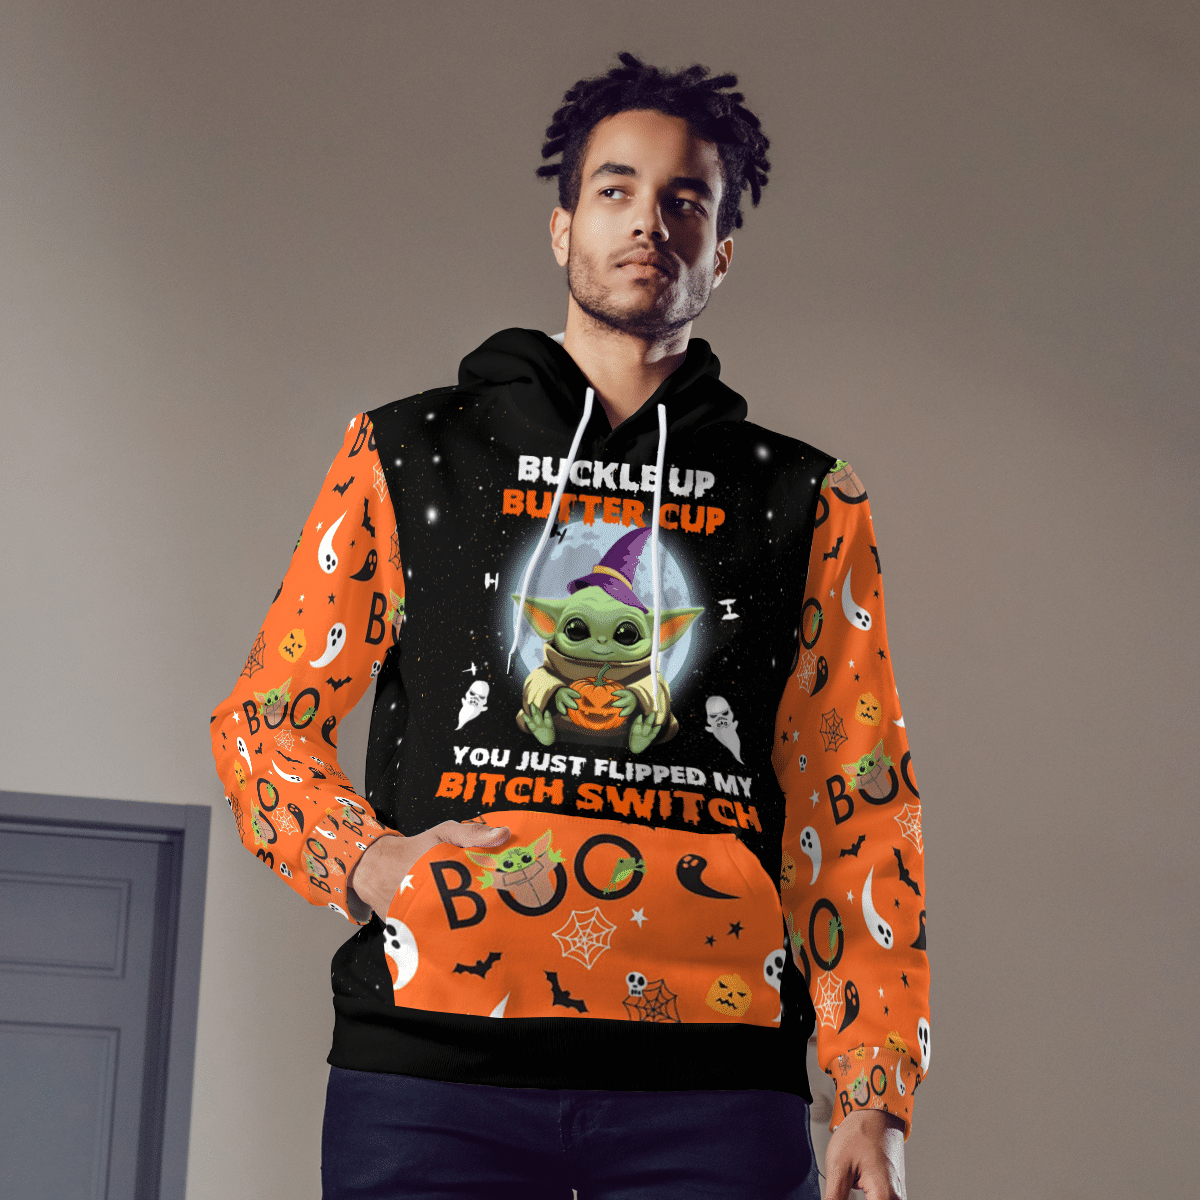 Baby Yoda buckle up butter cup you just flipped my bitch switch 3d hoodie 1.3